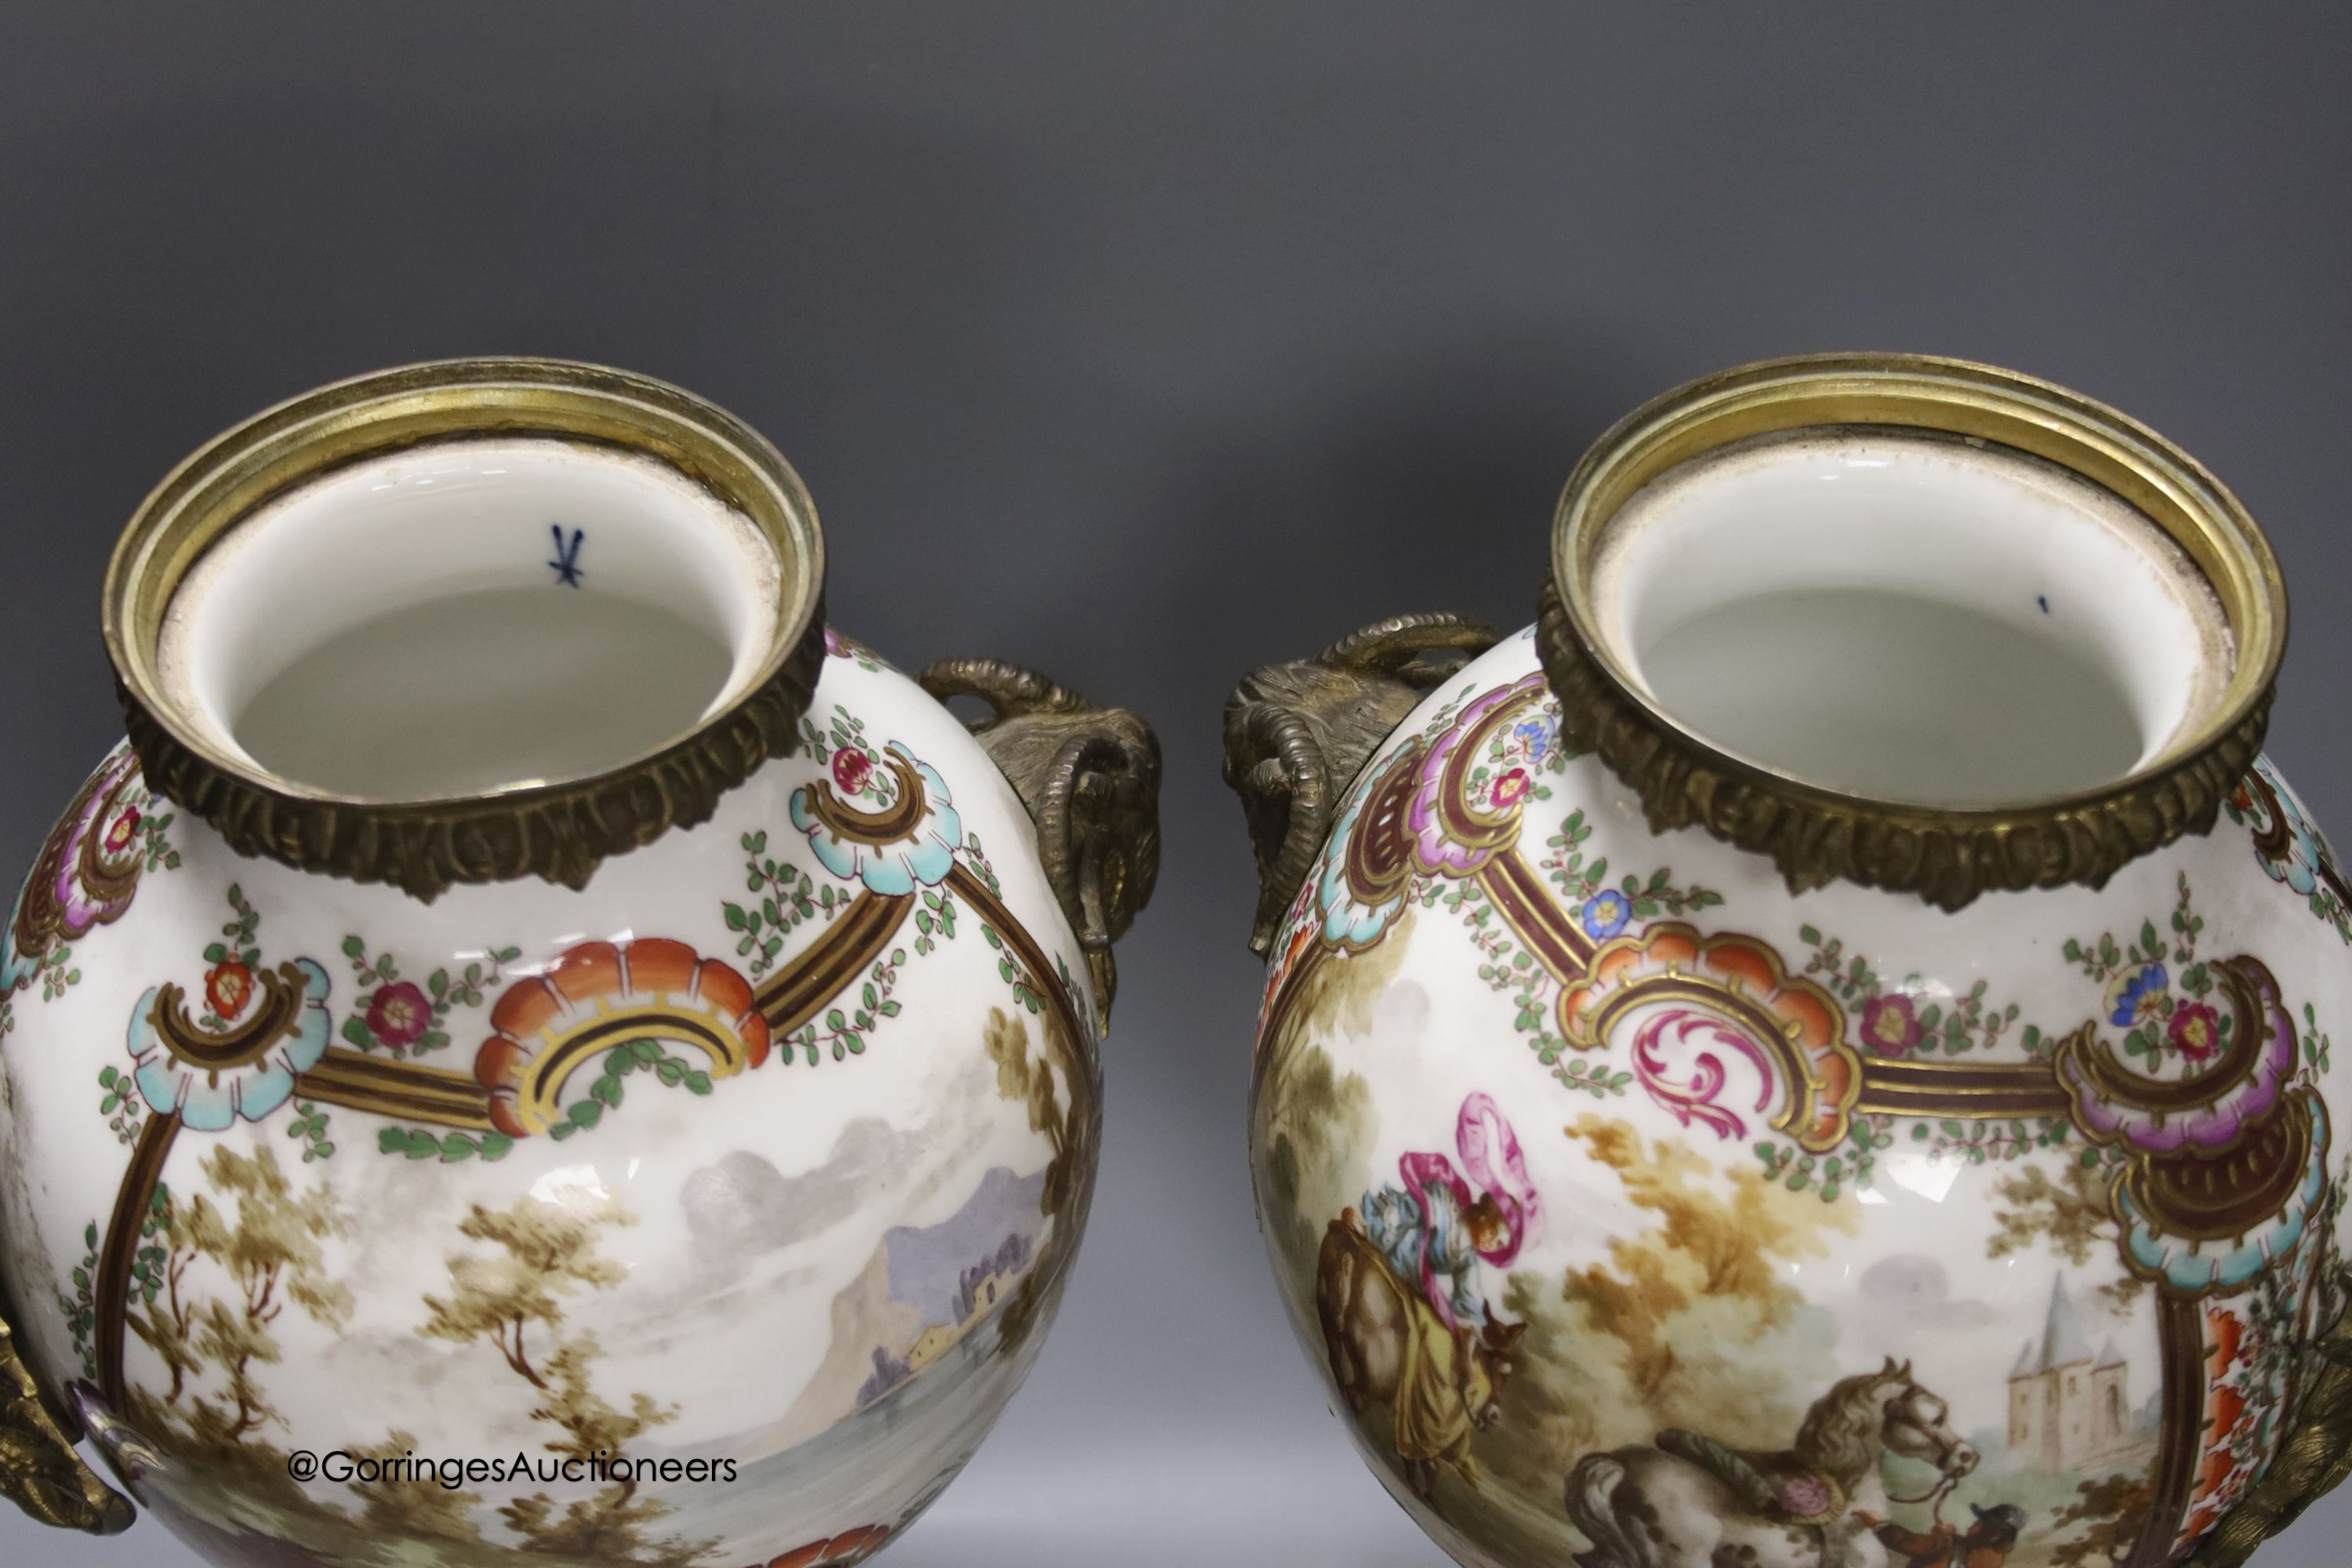 A pair of 19th century German ormolu mounted porcelain jars and covers, 41cm